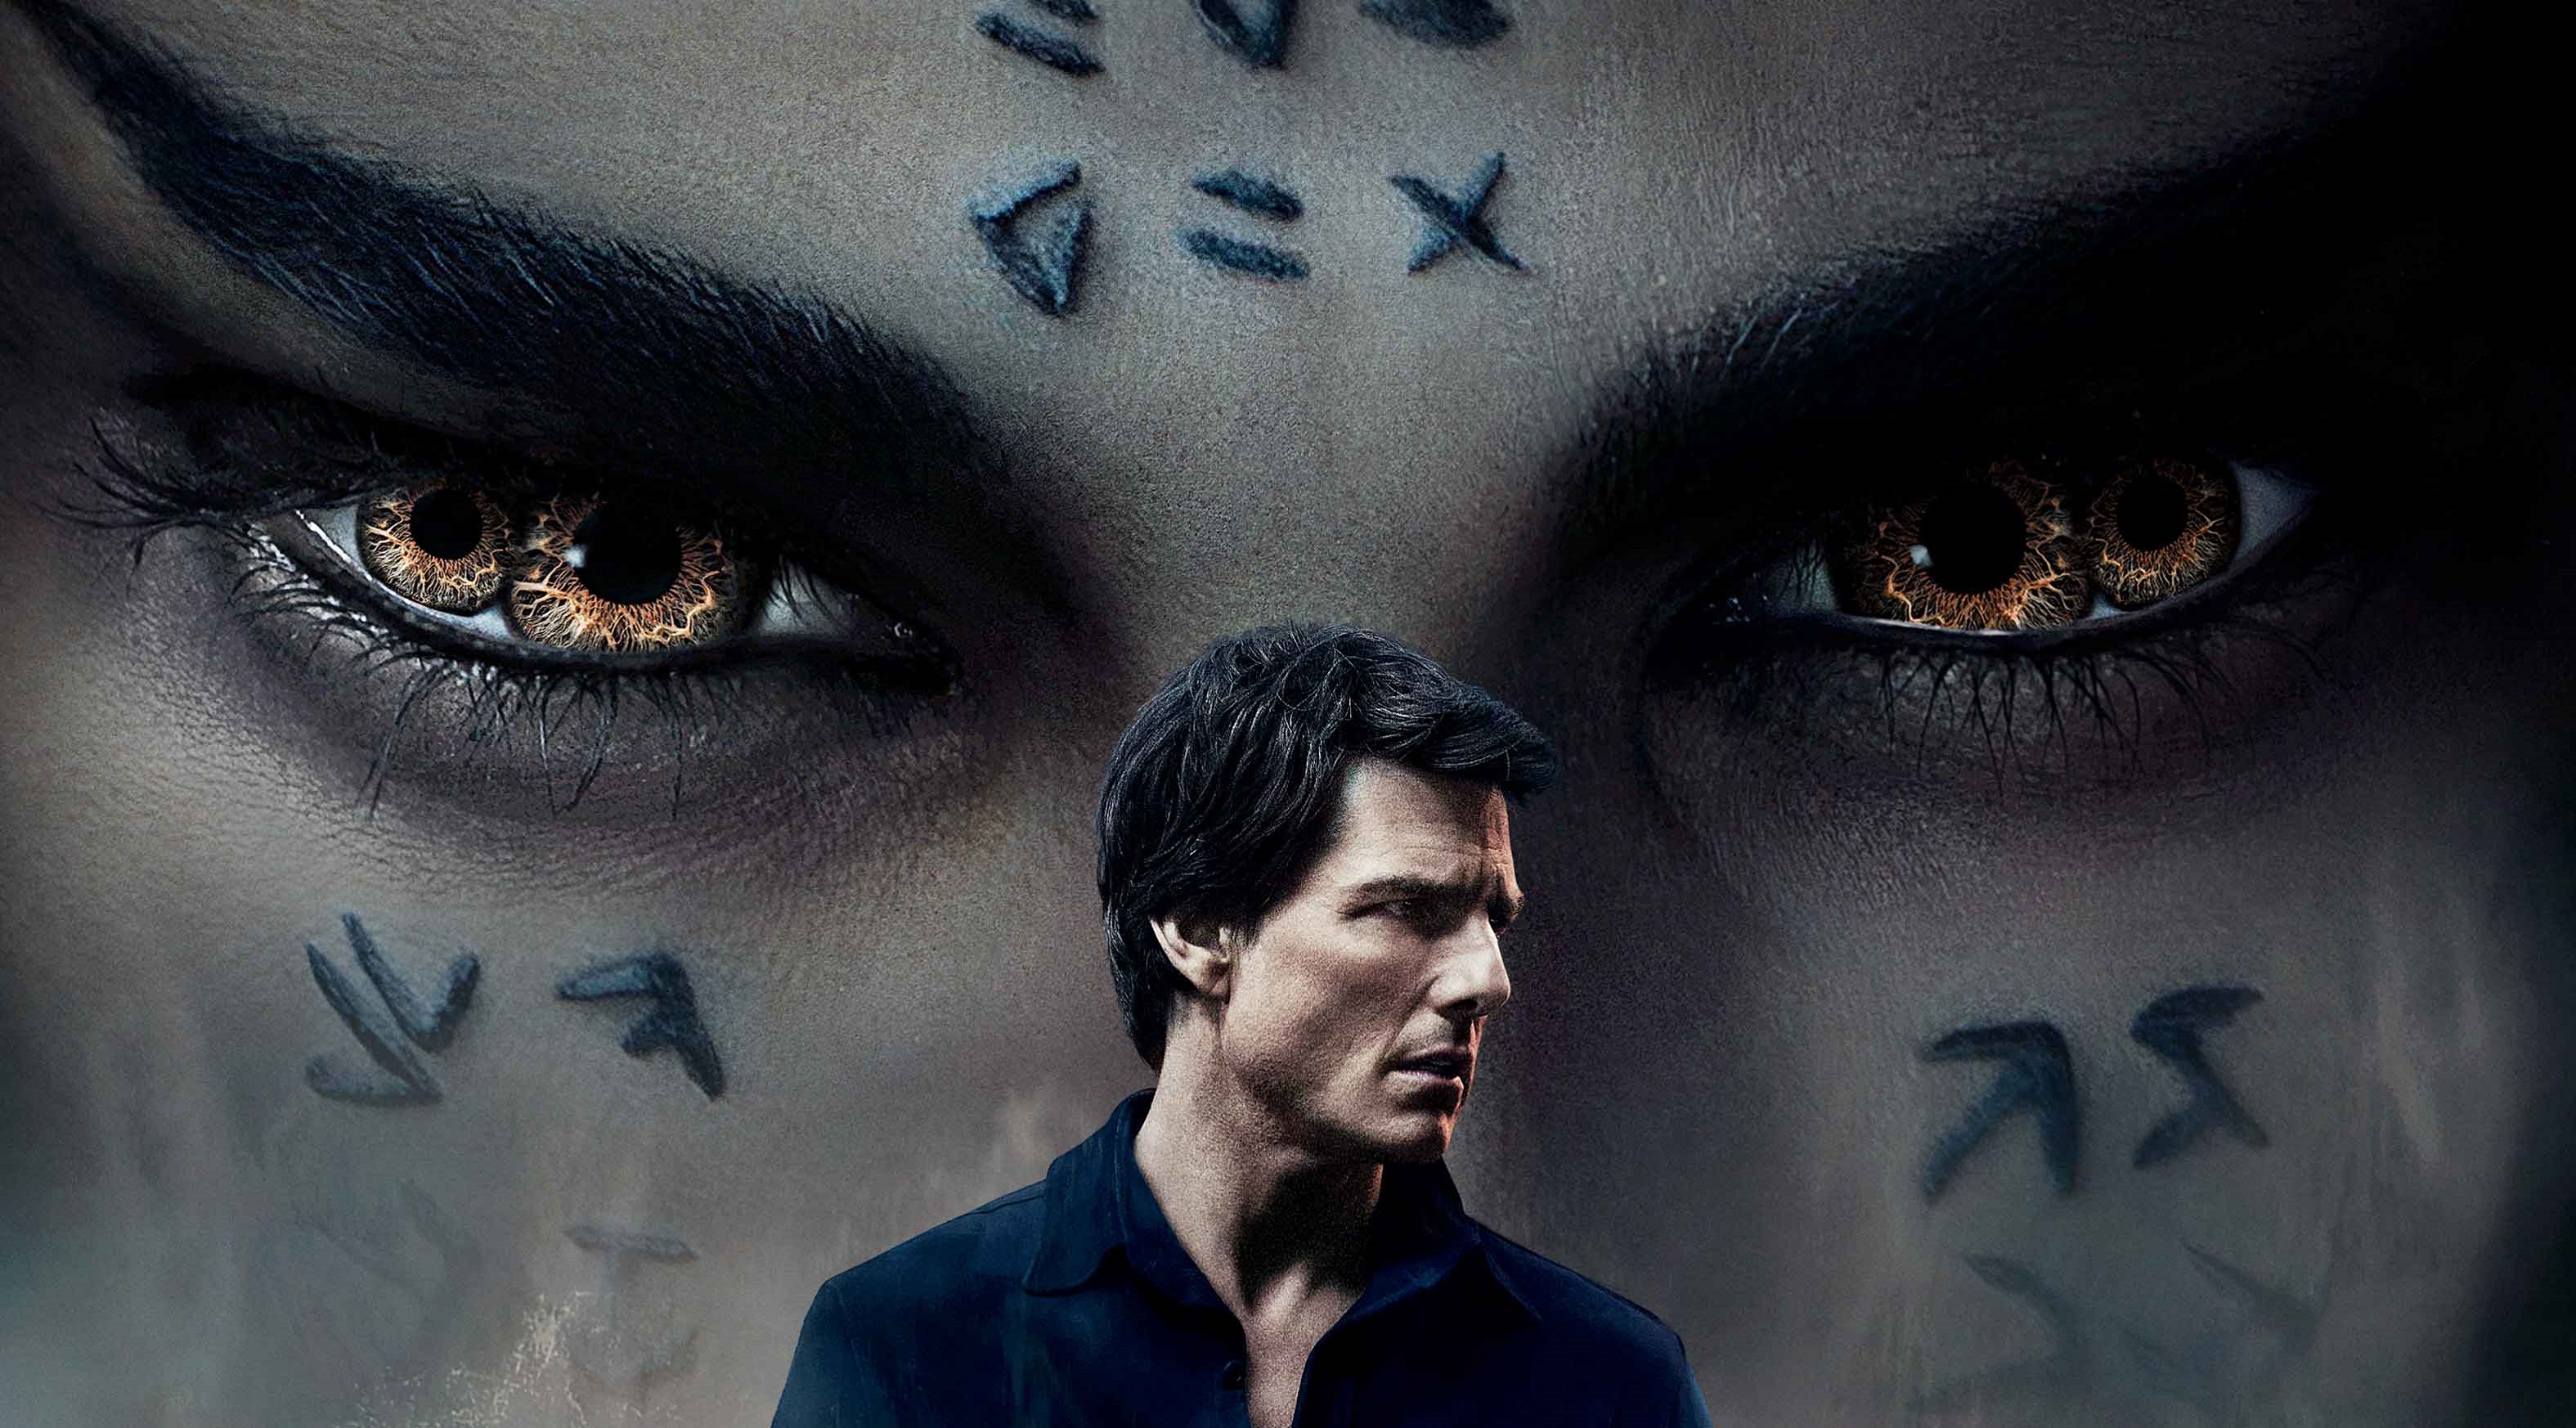 alex fauteux recommends the mummy hd download pic